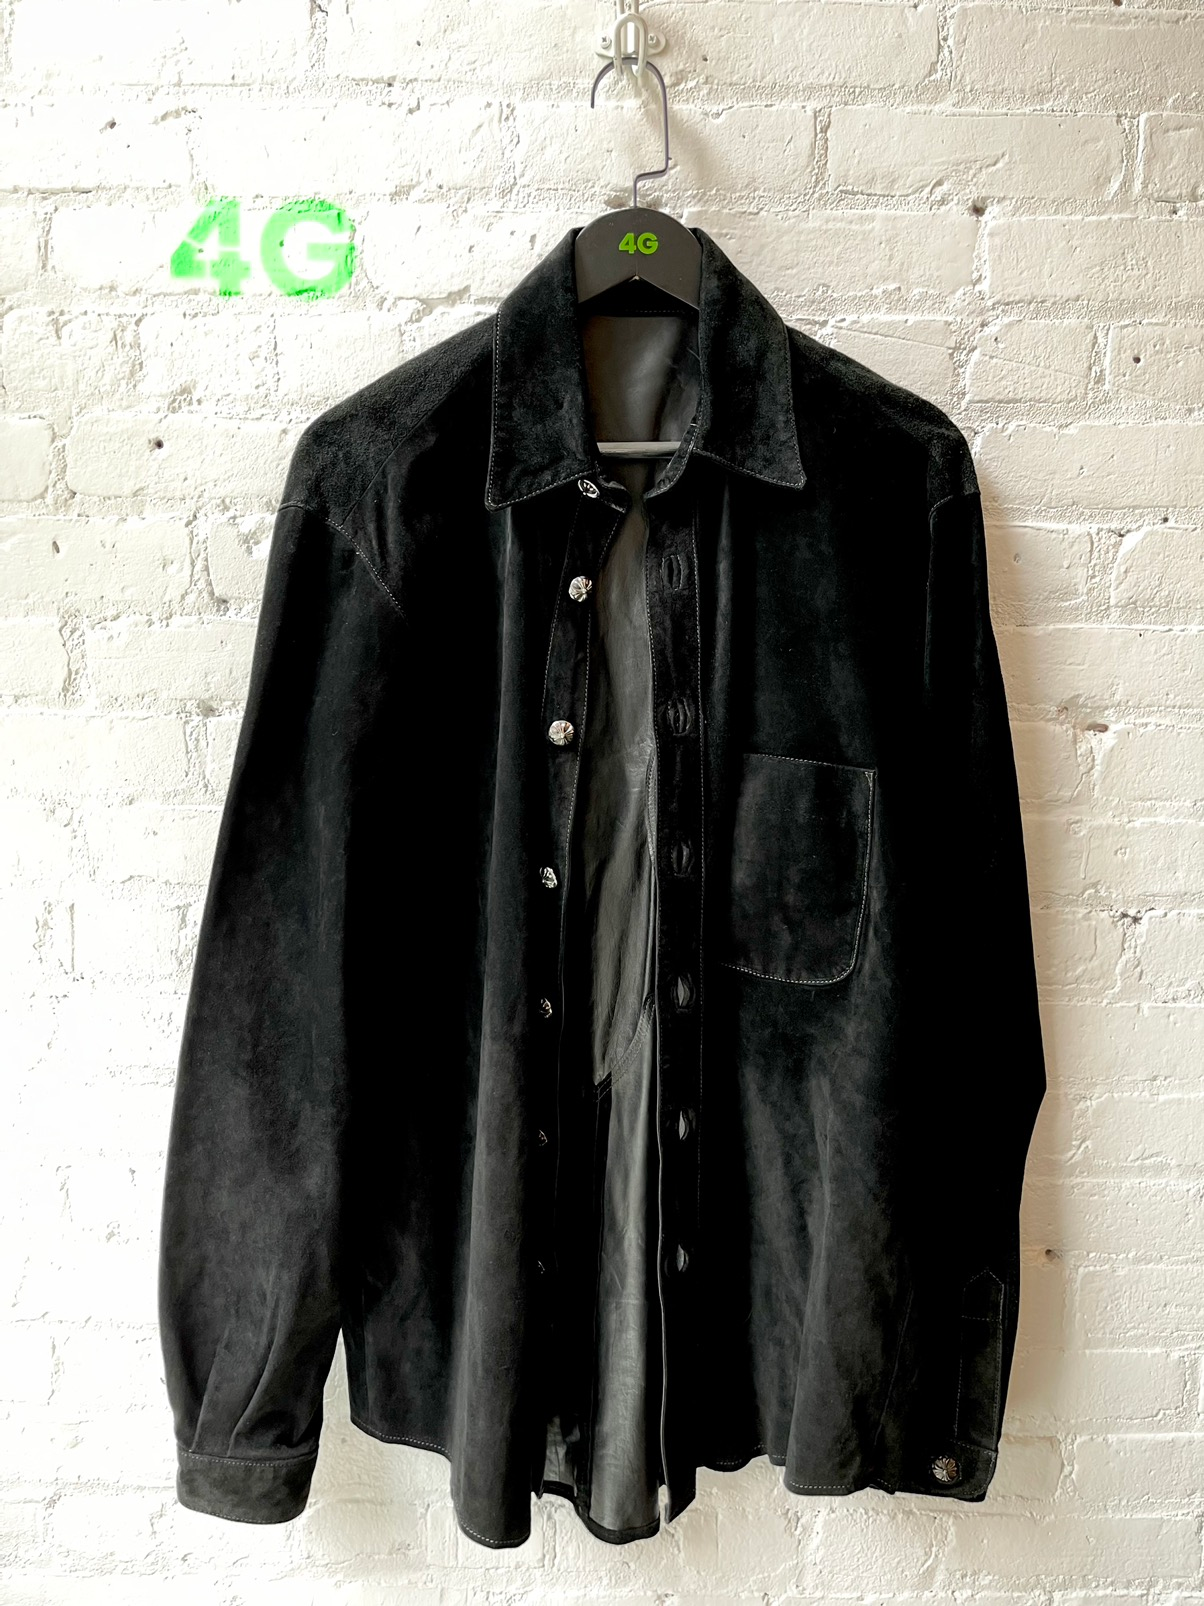 Chrome Hearts Black Suede Leather Jacket Shirt XL 4Gseller – 4GSELLER-NY